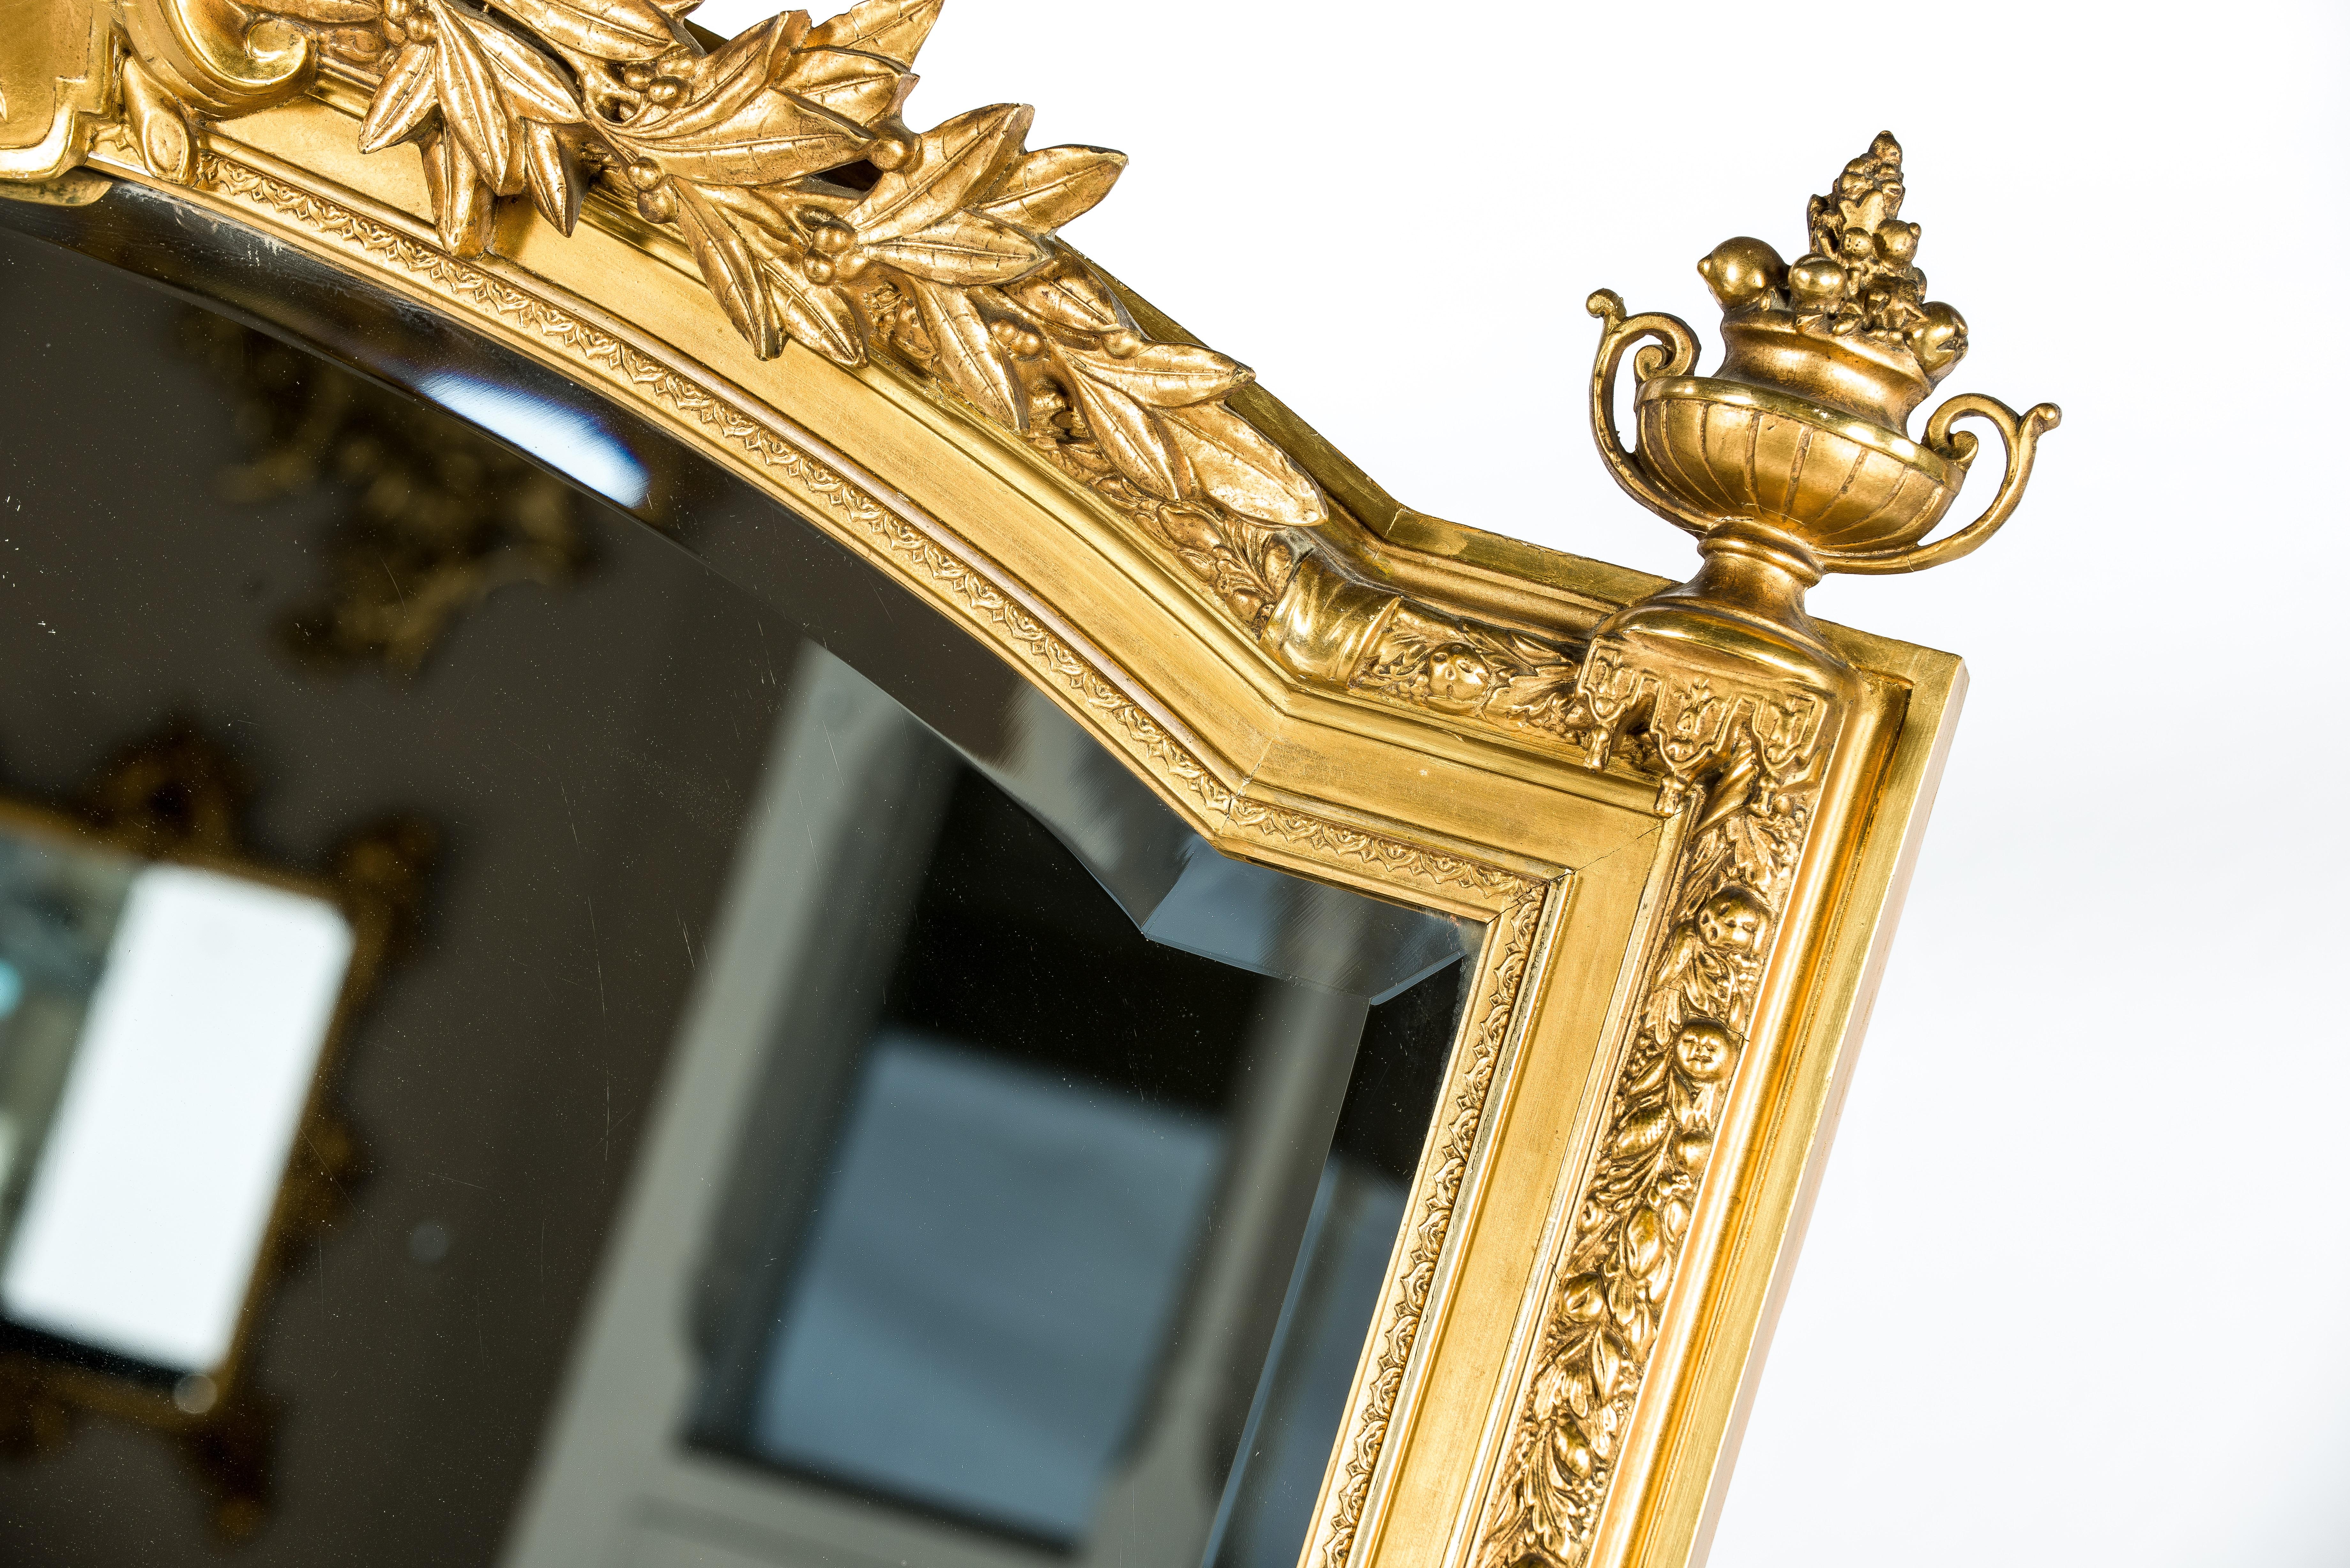 This beautiful large mirror was made in Northern France at the end of the 19th century. The mirror frame has a pine base smoothened with gesso and decorated with plaster mesh reinforced ornaments. The piece has an arched top with an elaborate crest